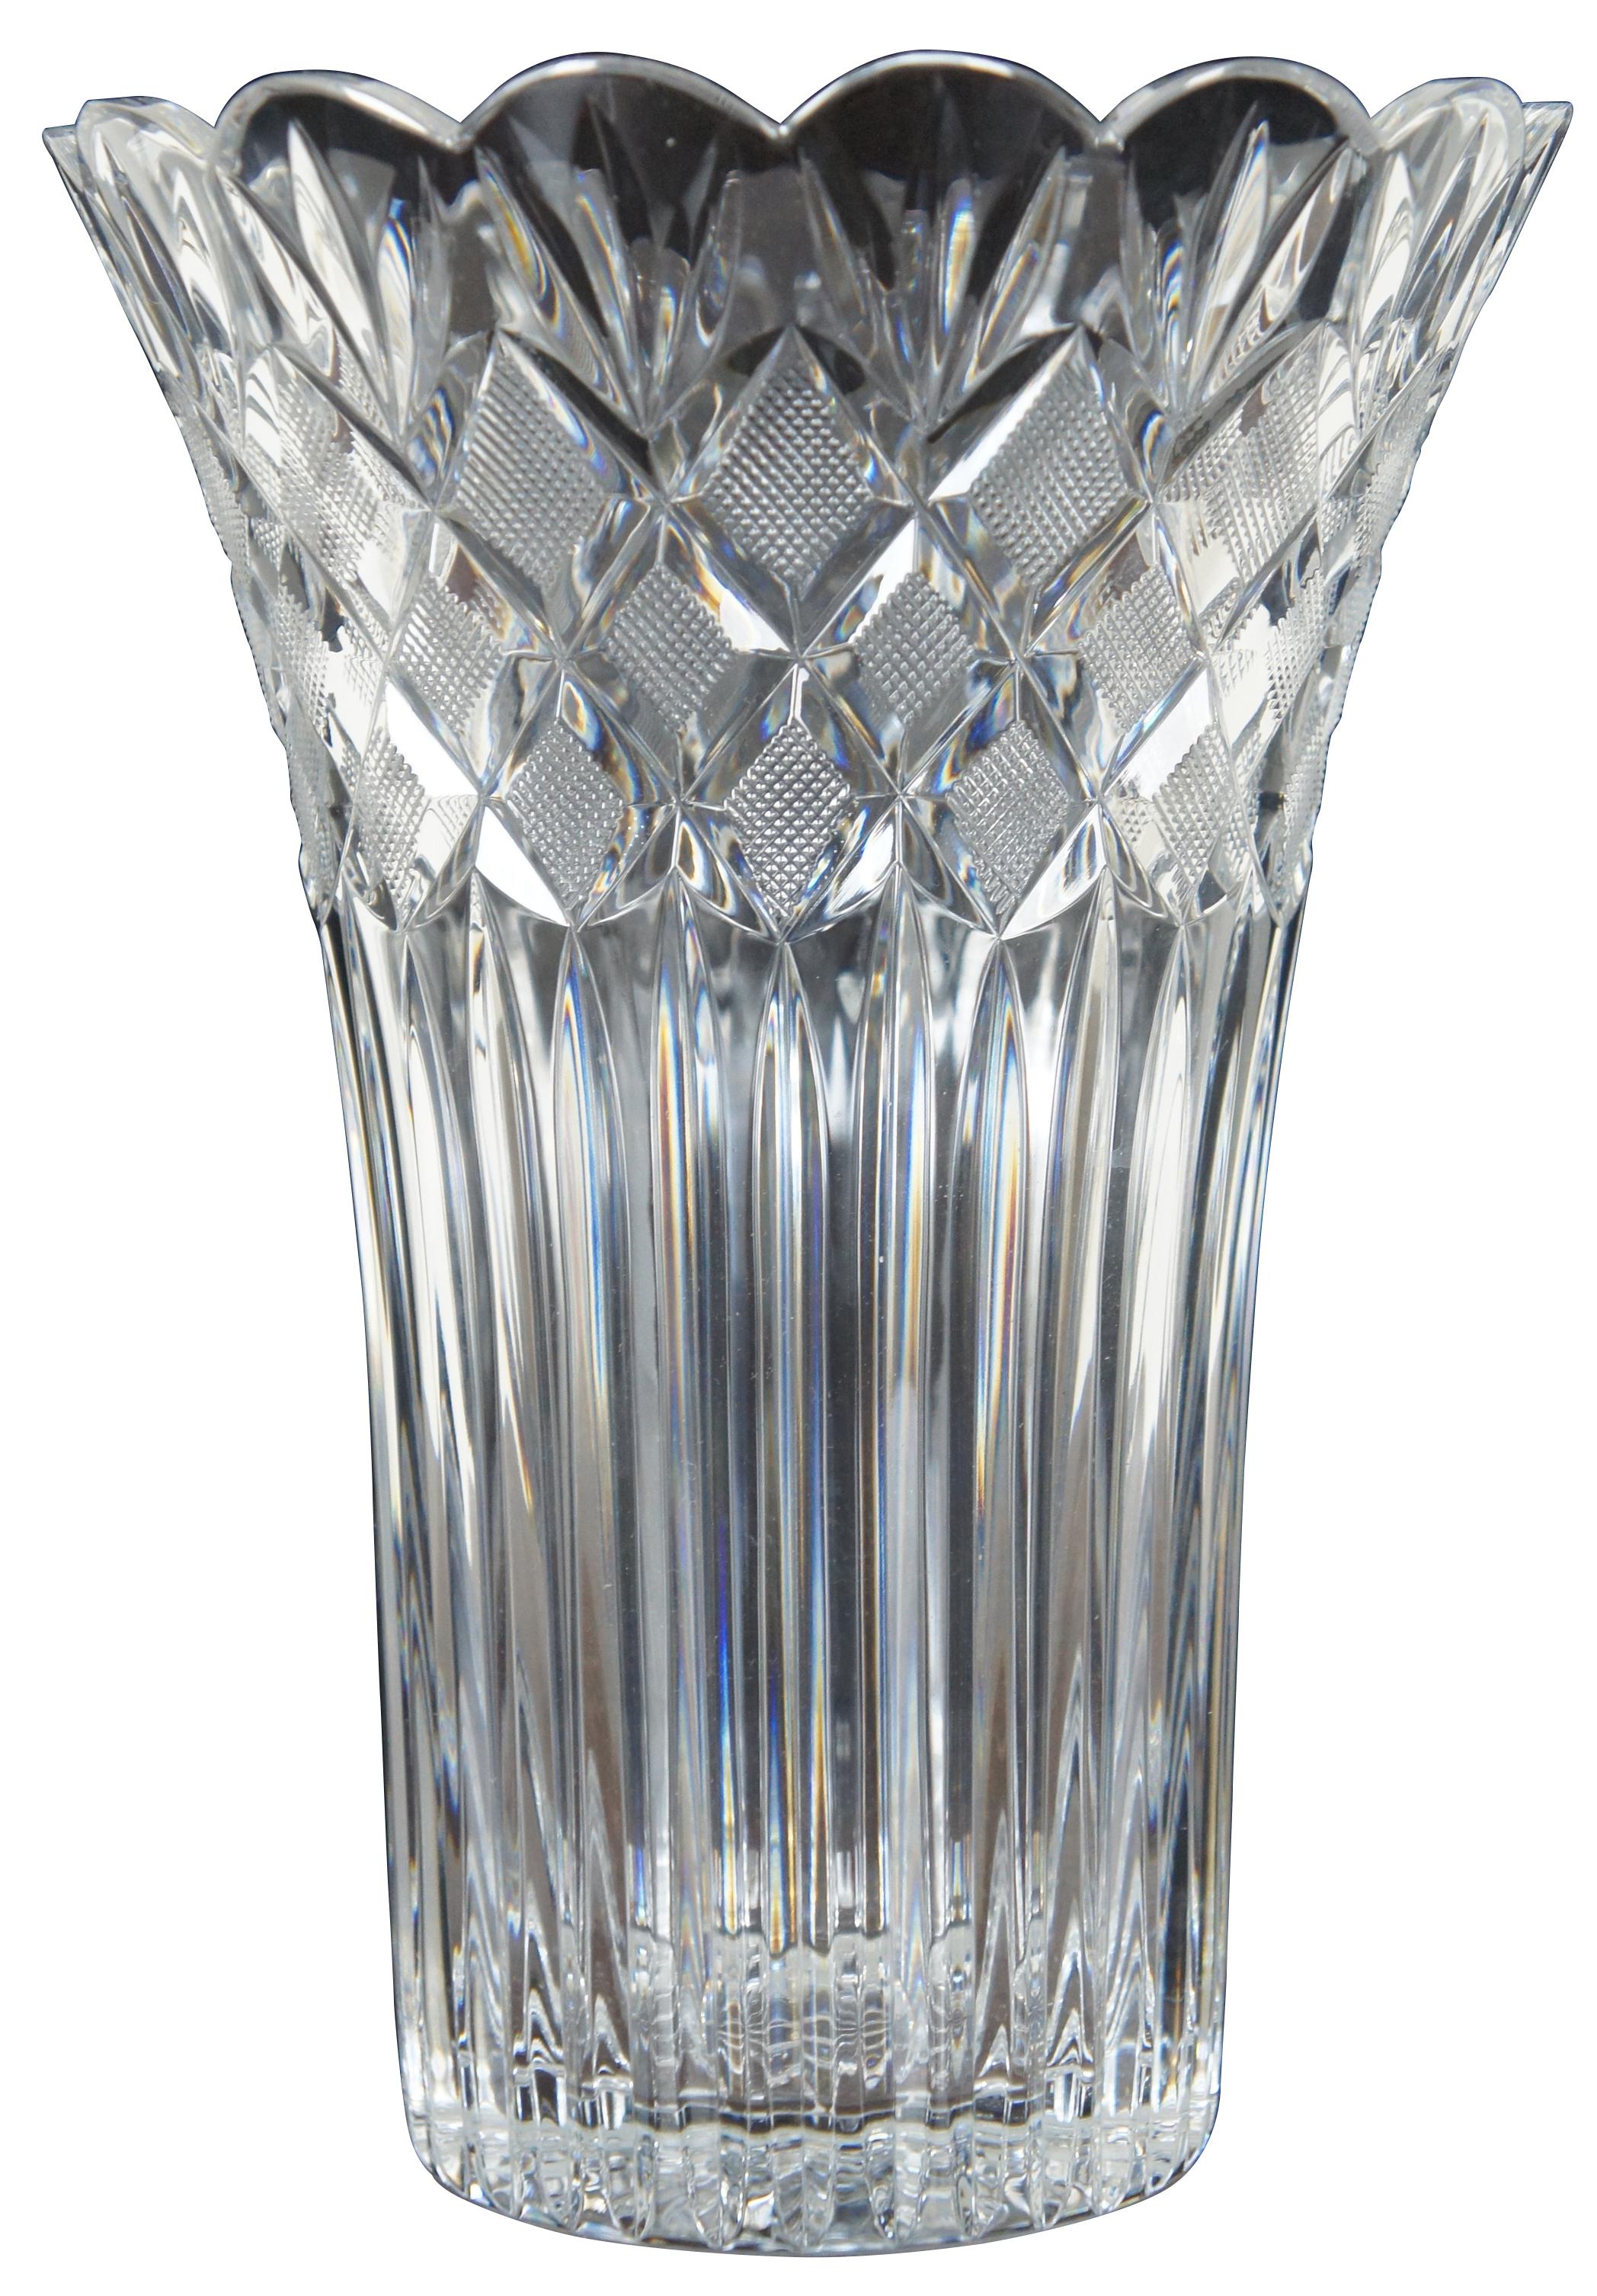 Waterford cut crystal Romance of Ireland collection Irish lace patterned centerpiece vase with scalloped edge and flared mouth. Includes original box. Measures: 10”.
  